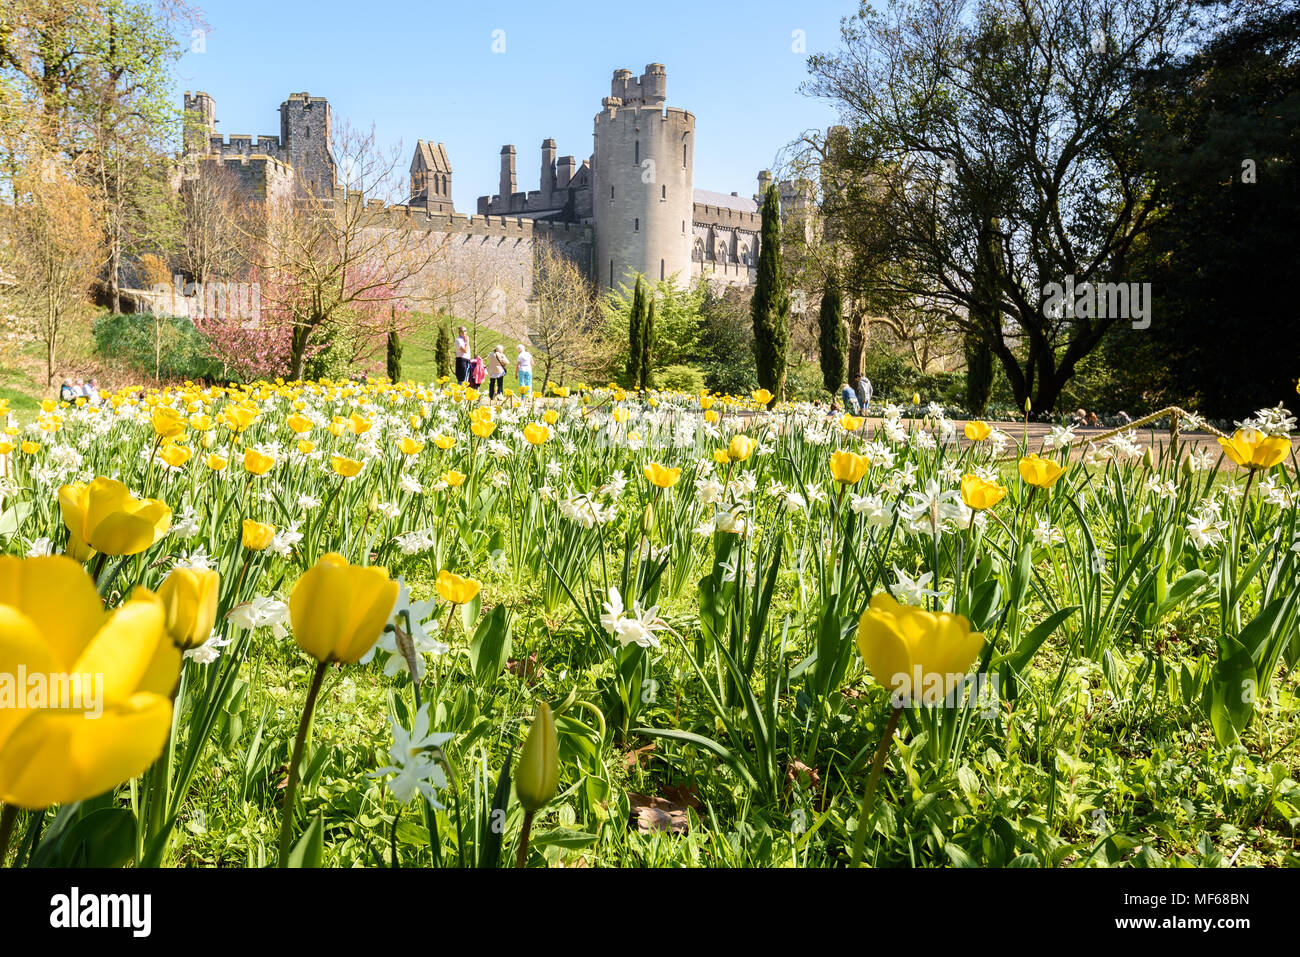 Views over a wild planting of swathes of yellow and white tulips to the castle during the Tulip Festival at Arundel Castle.  photo ©Julia Claxton Stock Photo